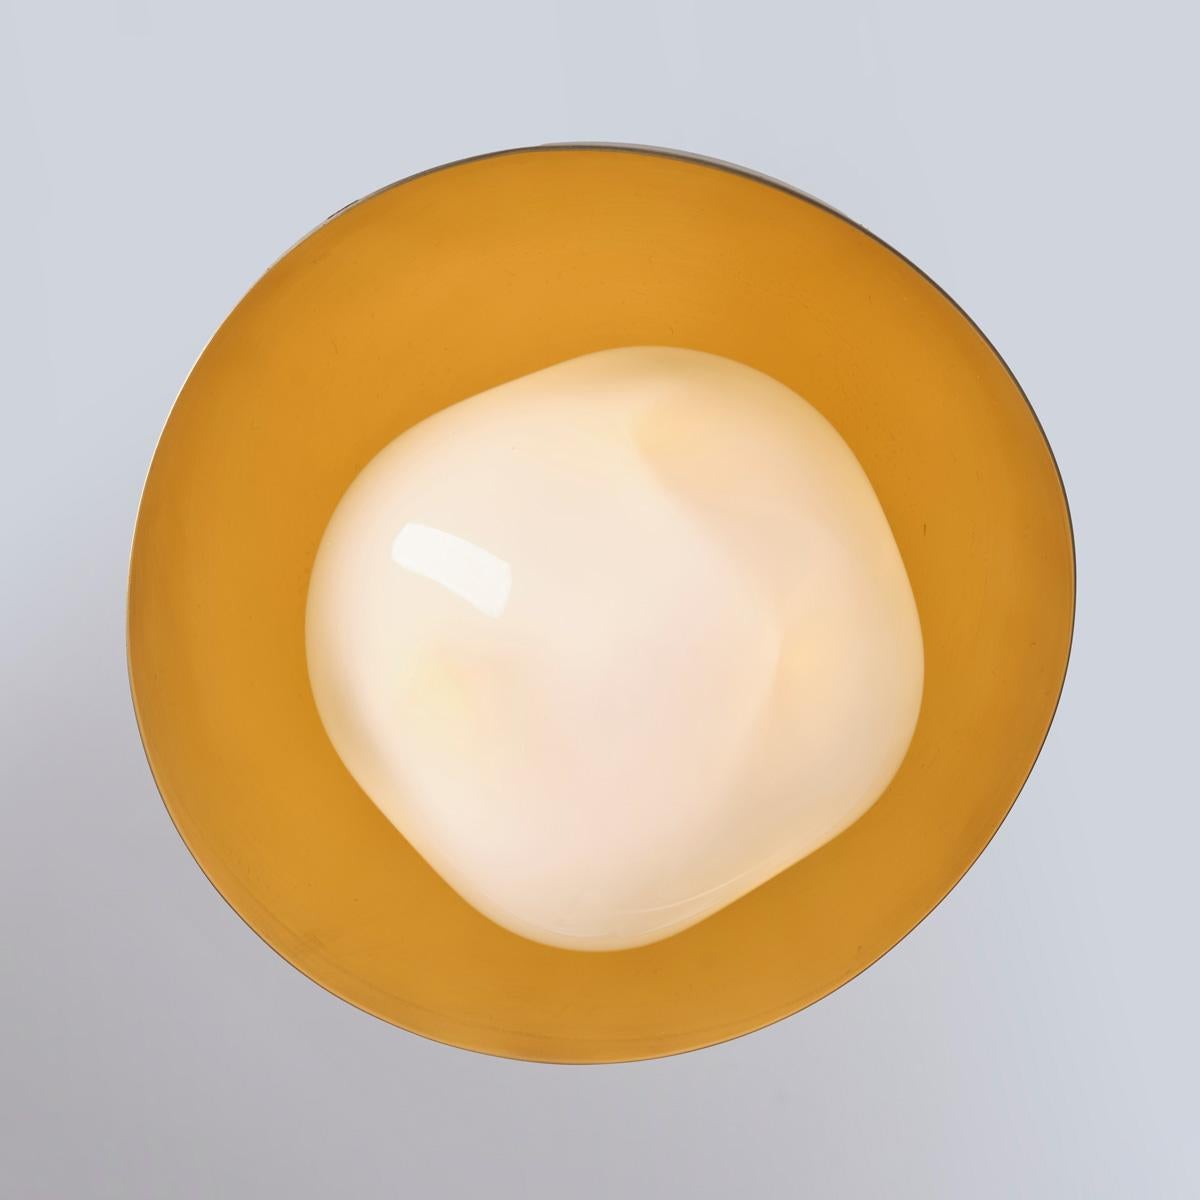 Perla Mini Wall Light by Gaspare Asaro. Sand White and Satin Brass Finish In New Condition For Sale In New York, NY